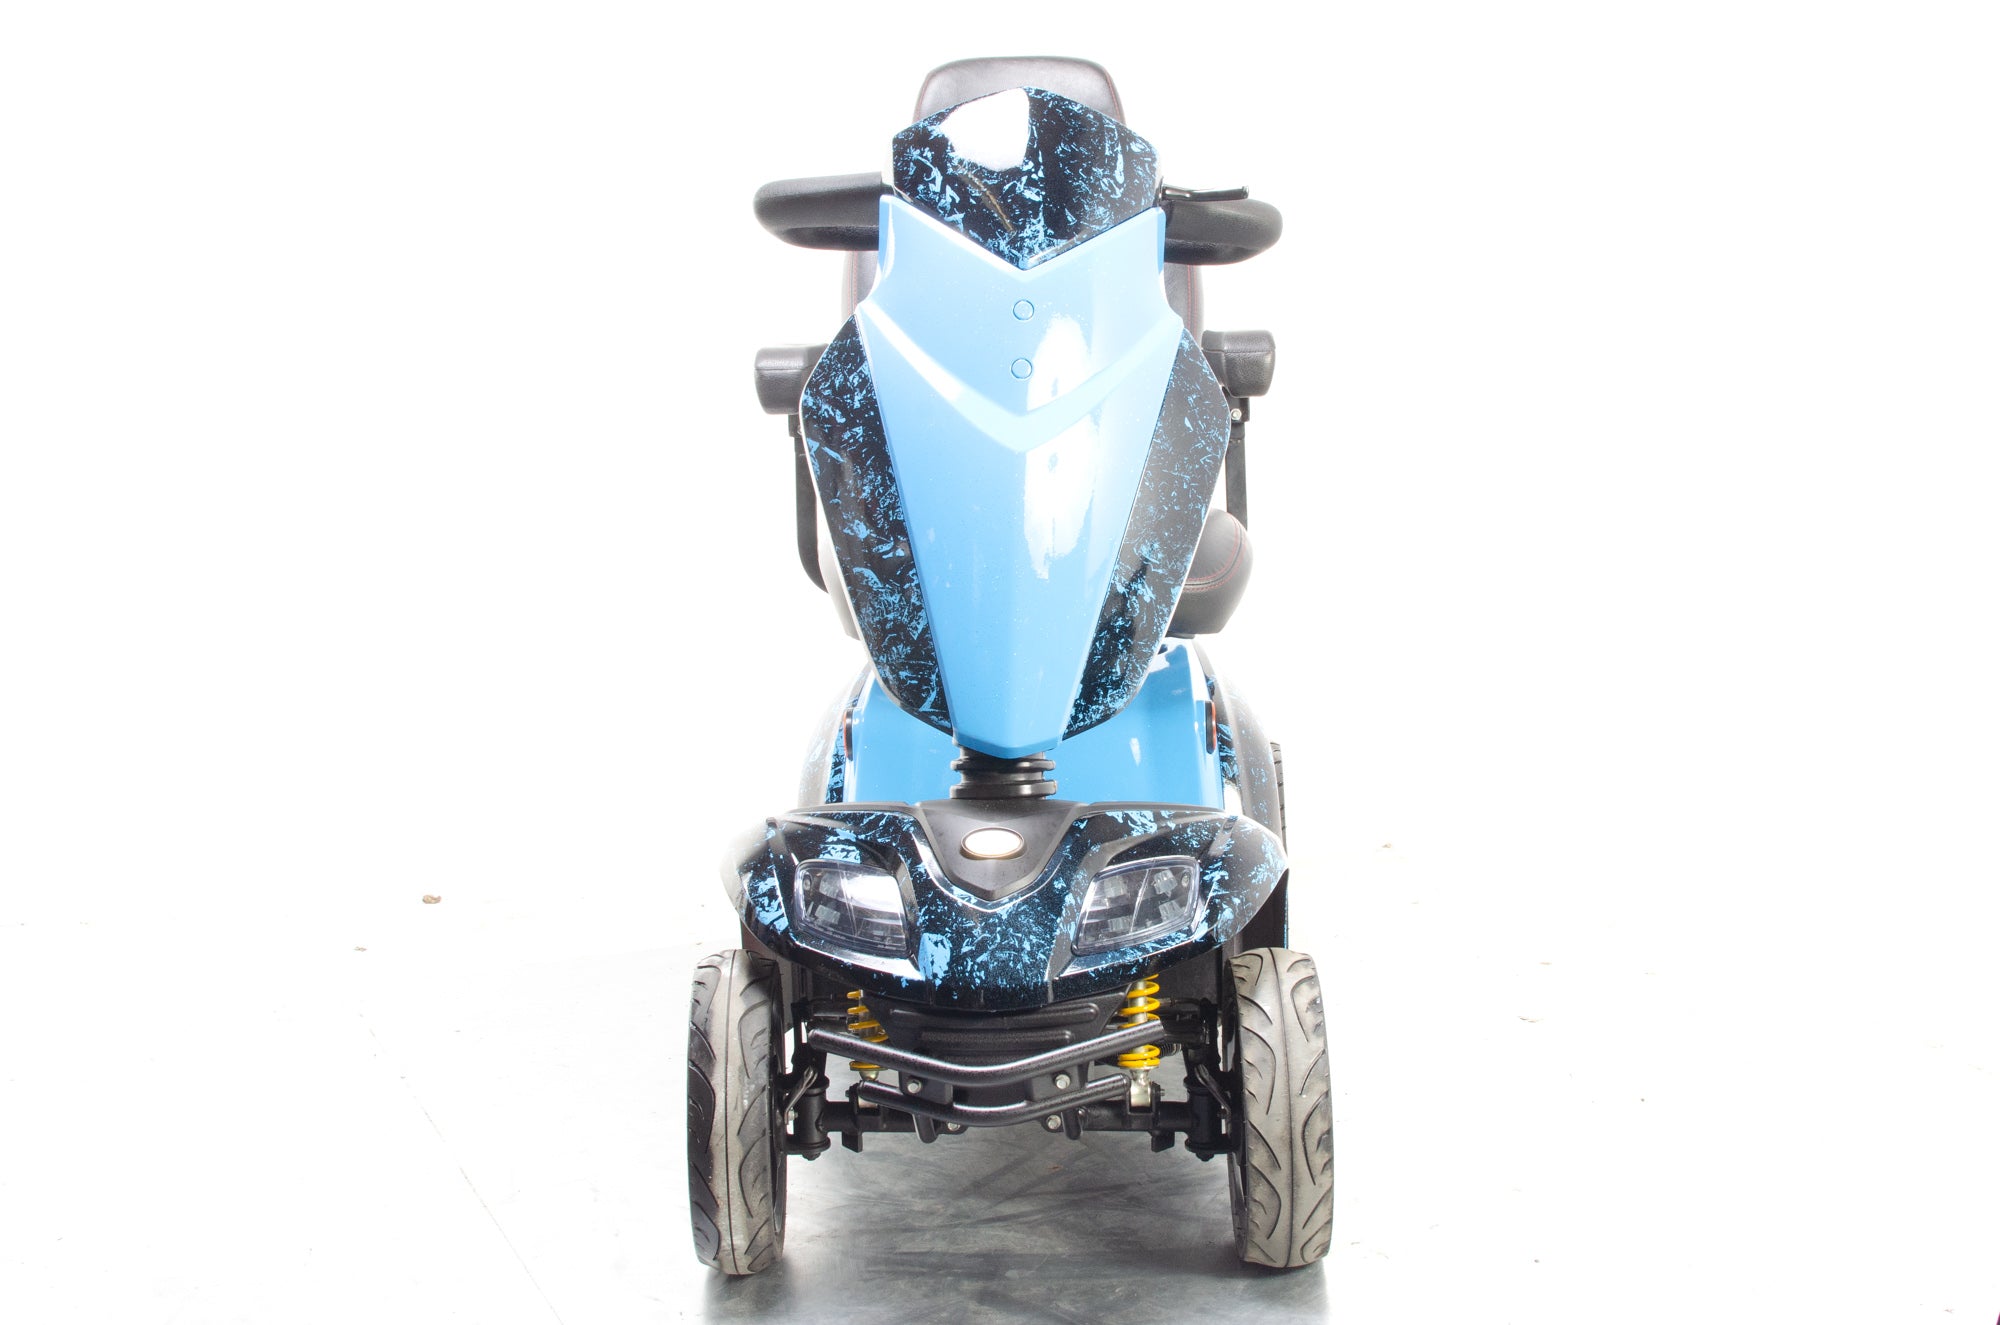 Kymco Agility 8mph Electric Mobility Scooter Road Large All-Terrain